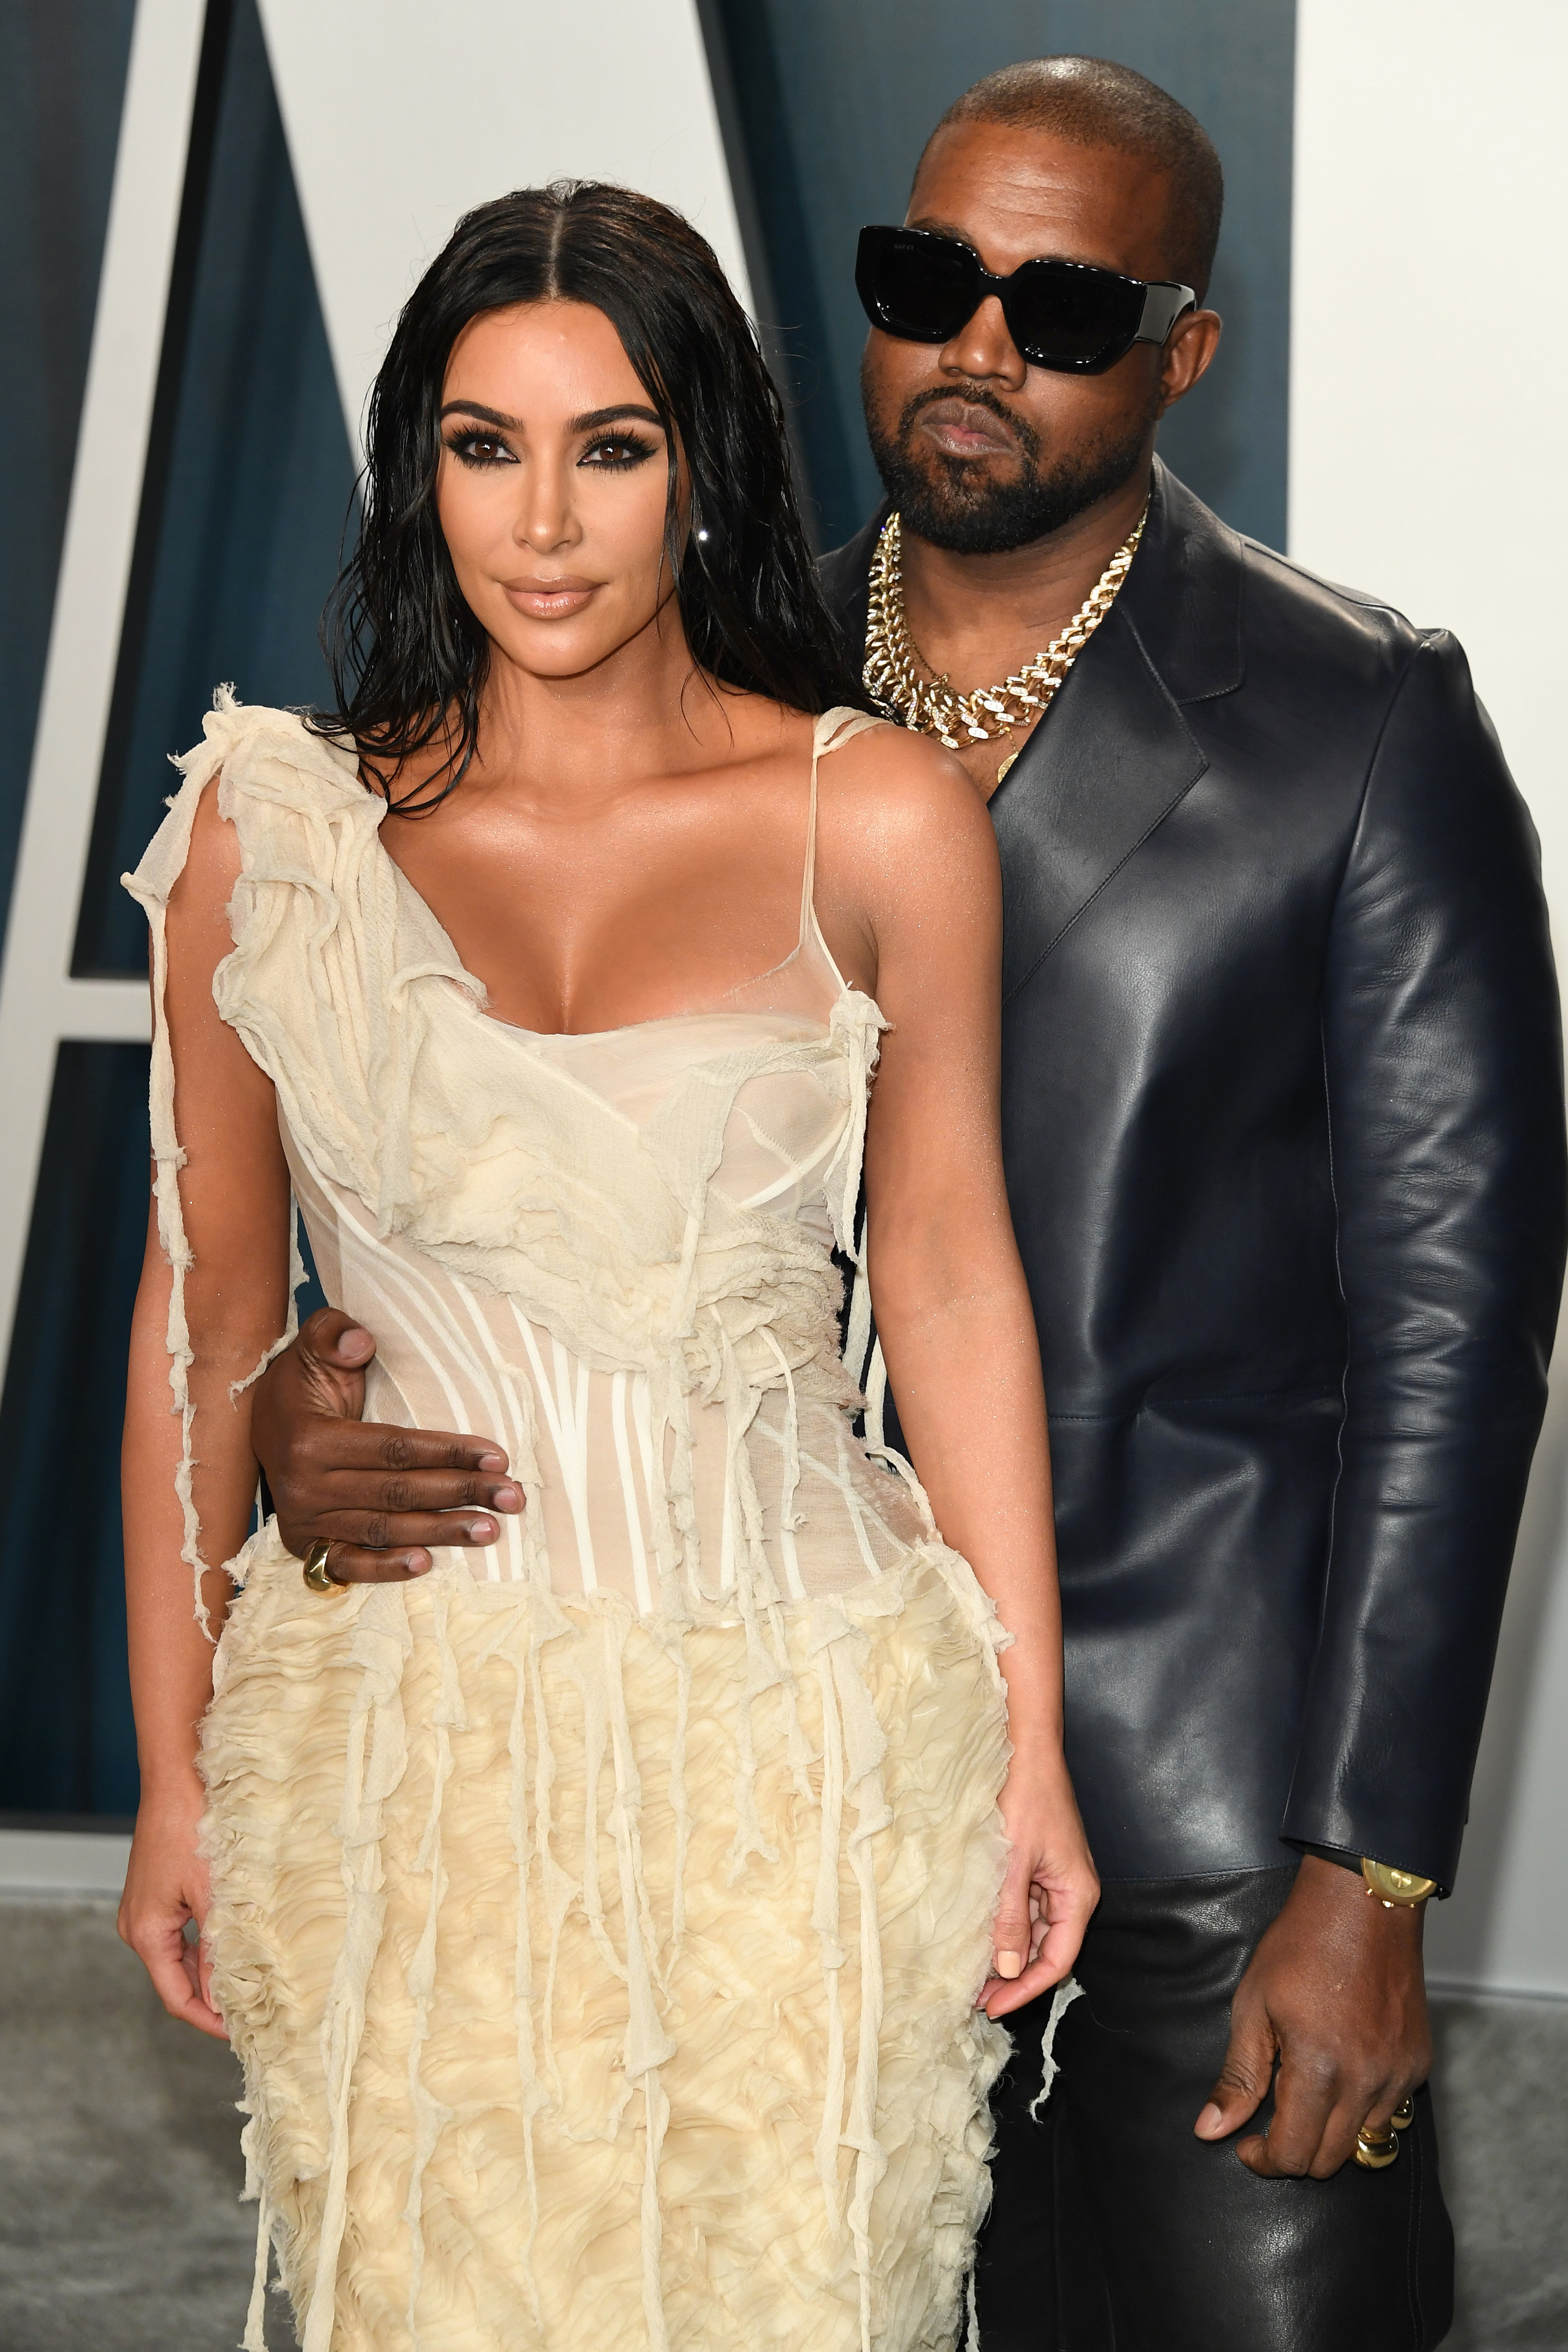 Kim Kardashian and Kanye West attend the 2020 Vanity Fair Oscar party on February 09, 2020